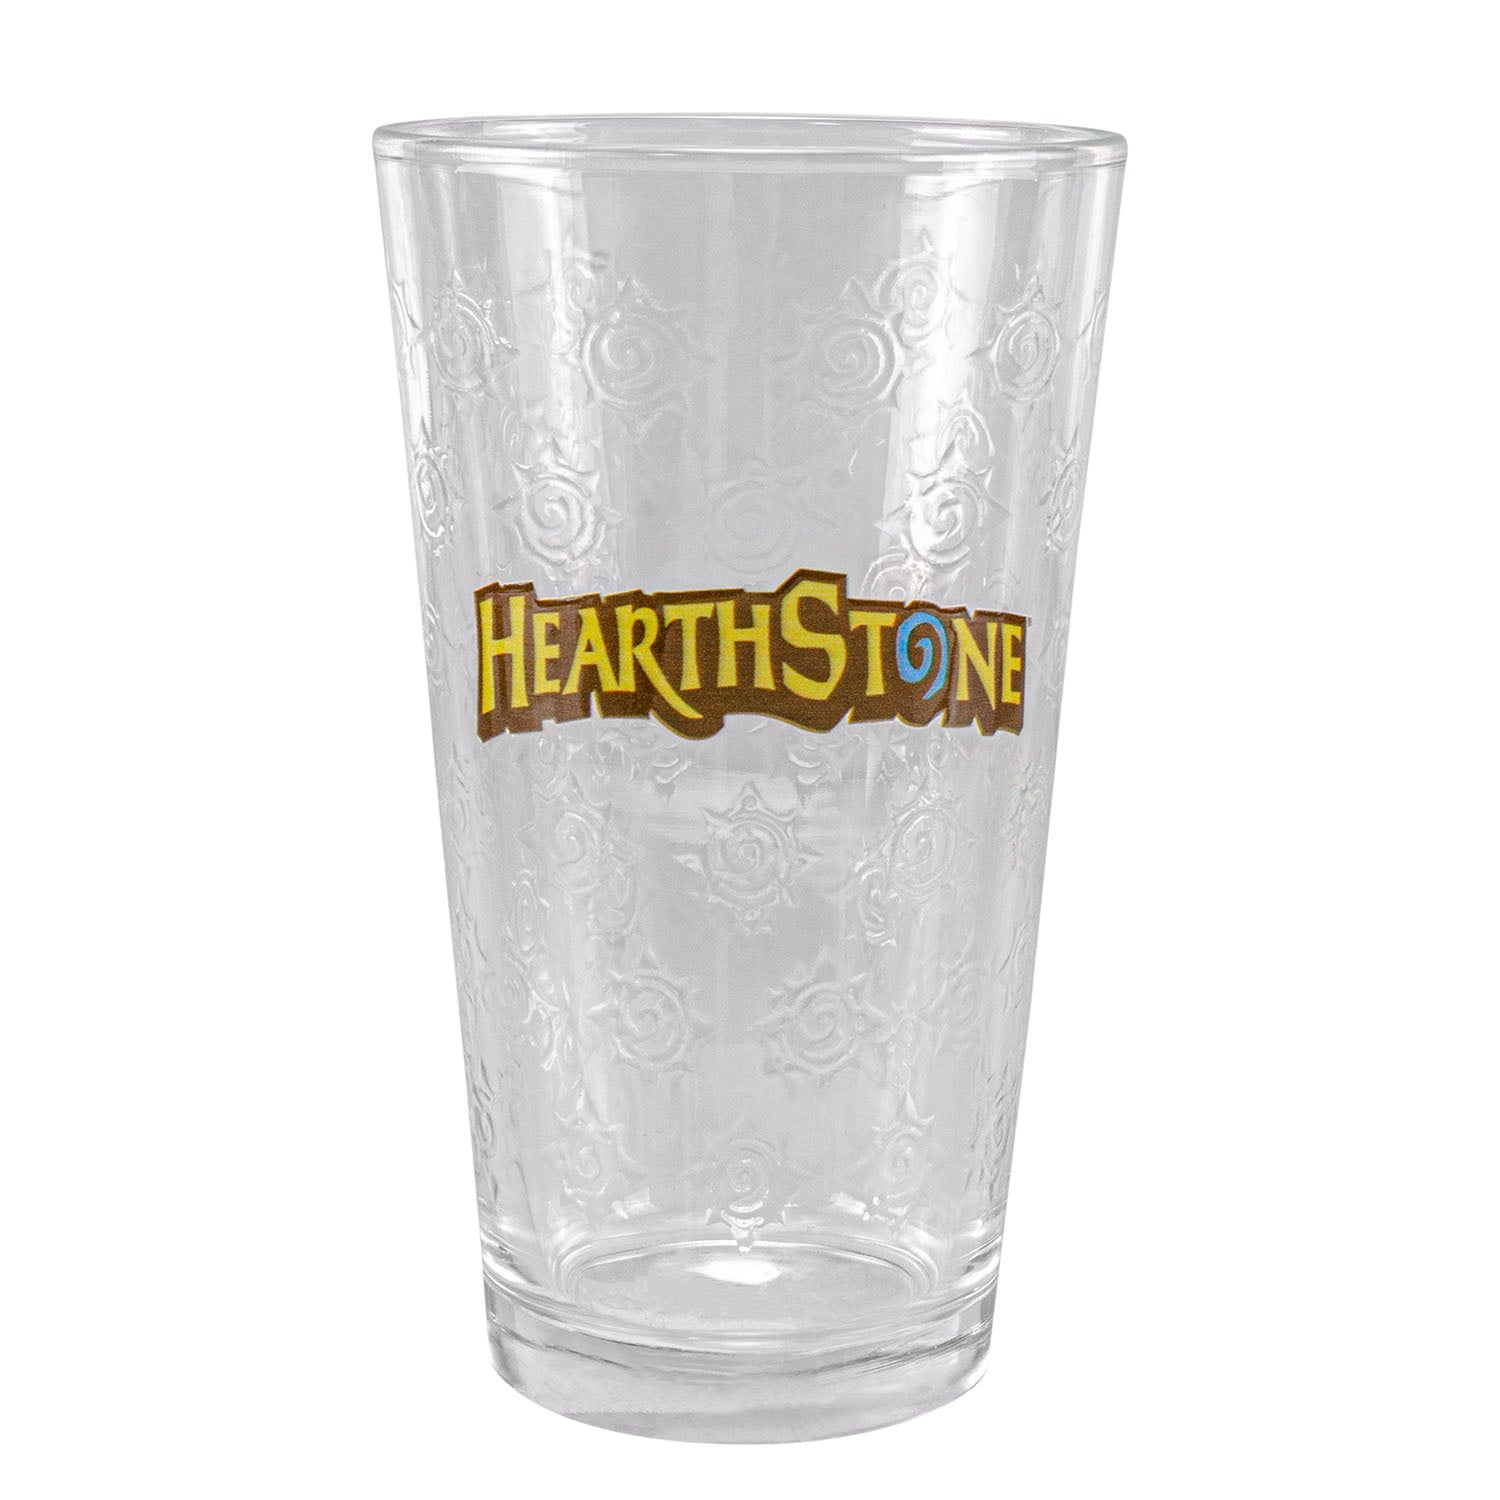 Hearthstone 454ml Pint Glass in Yellow - Front View